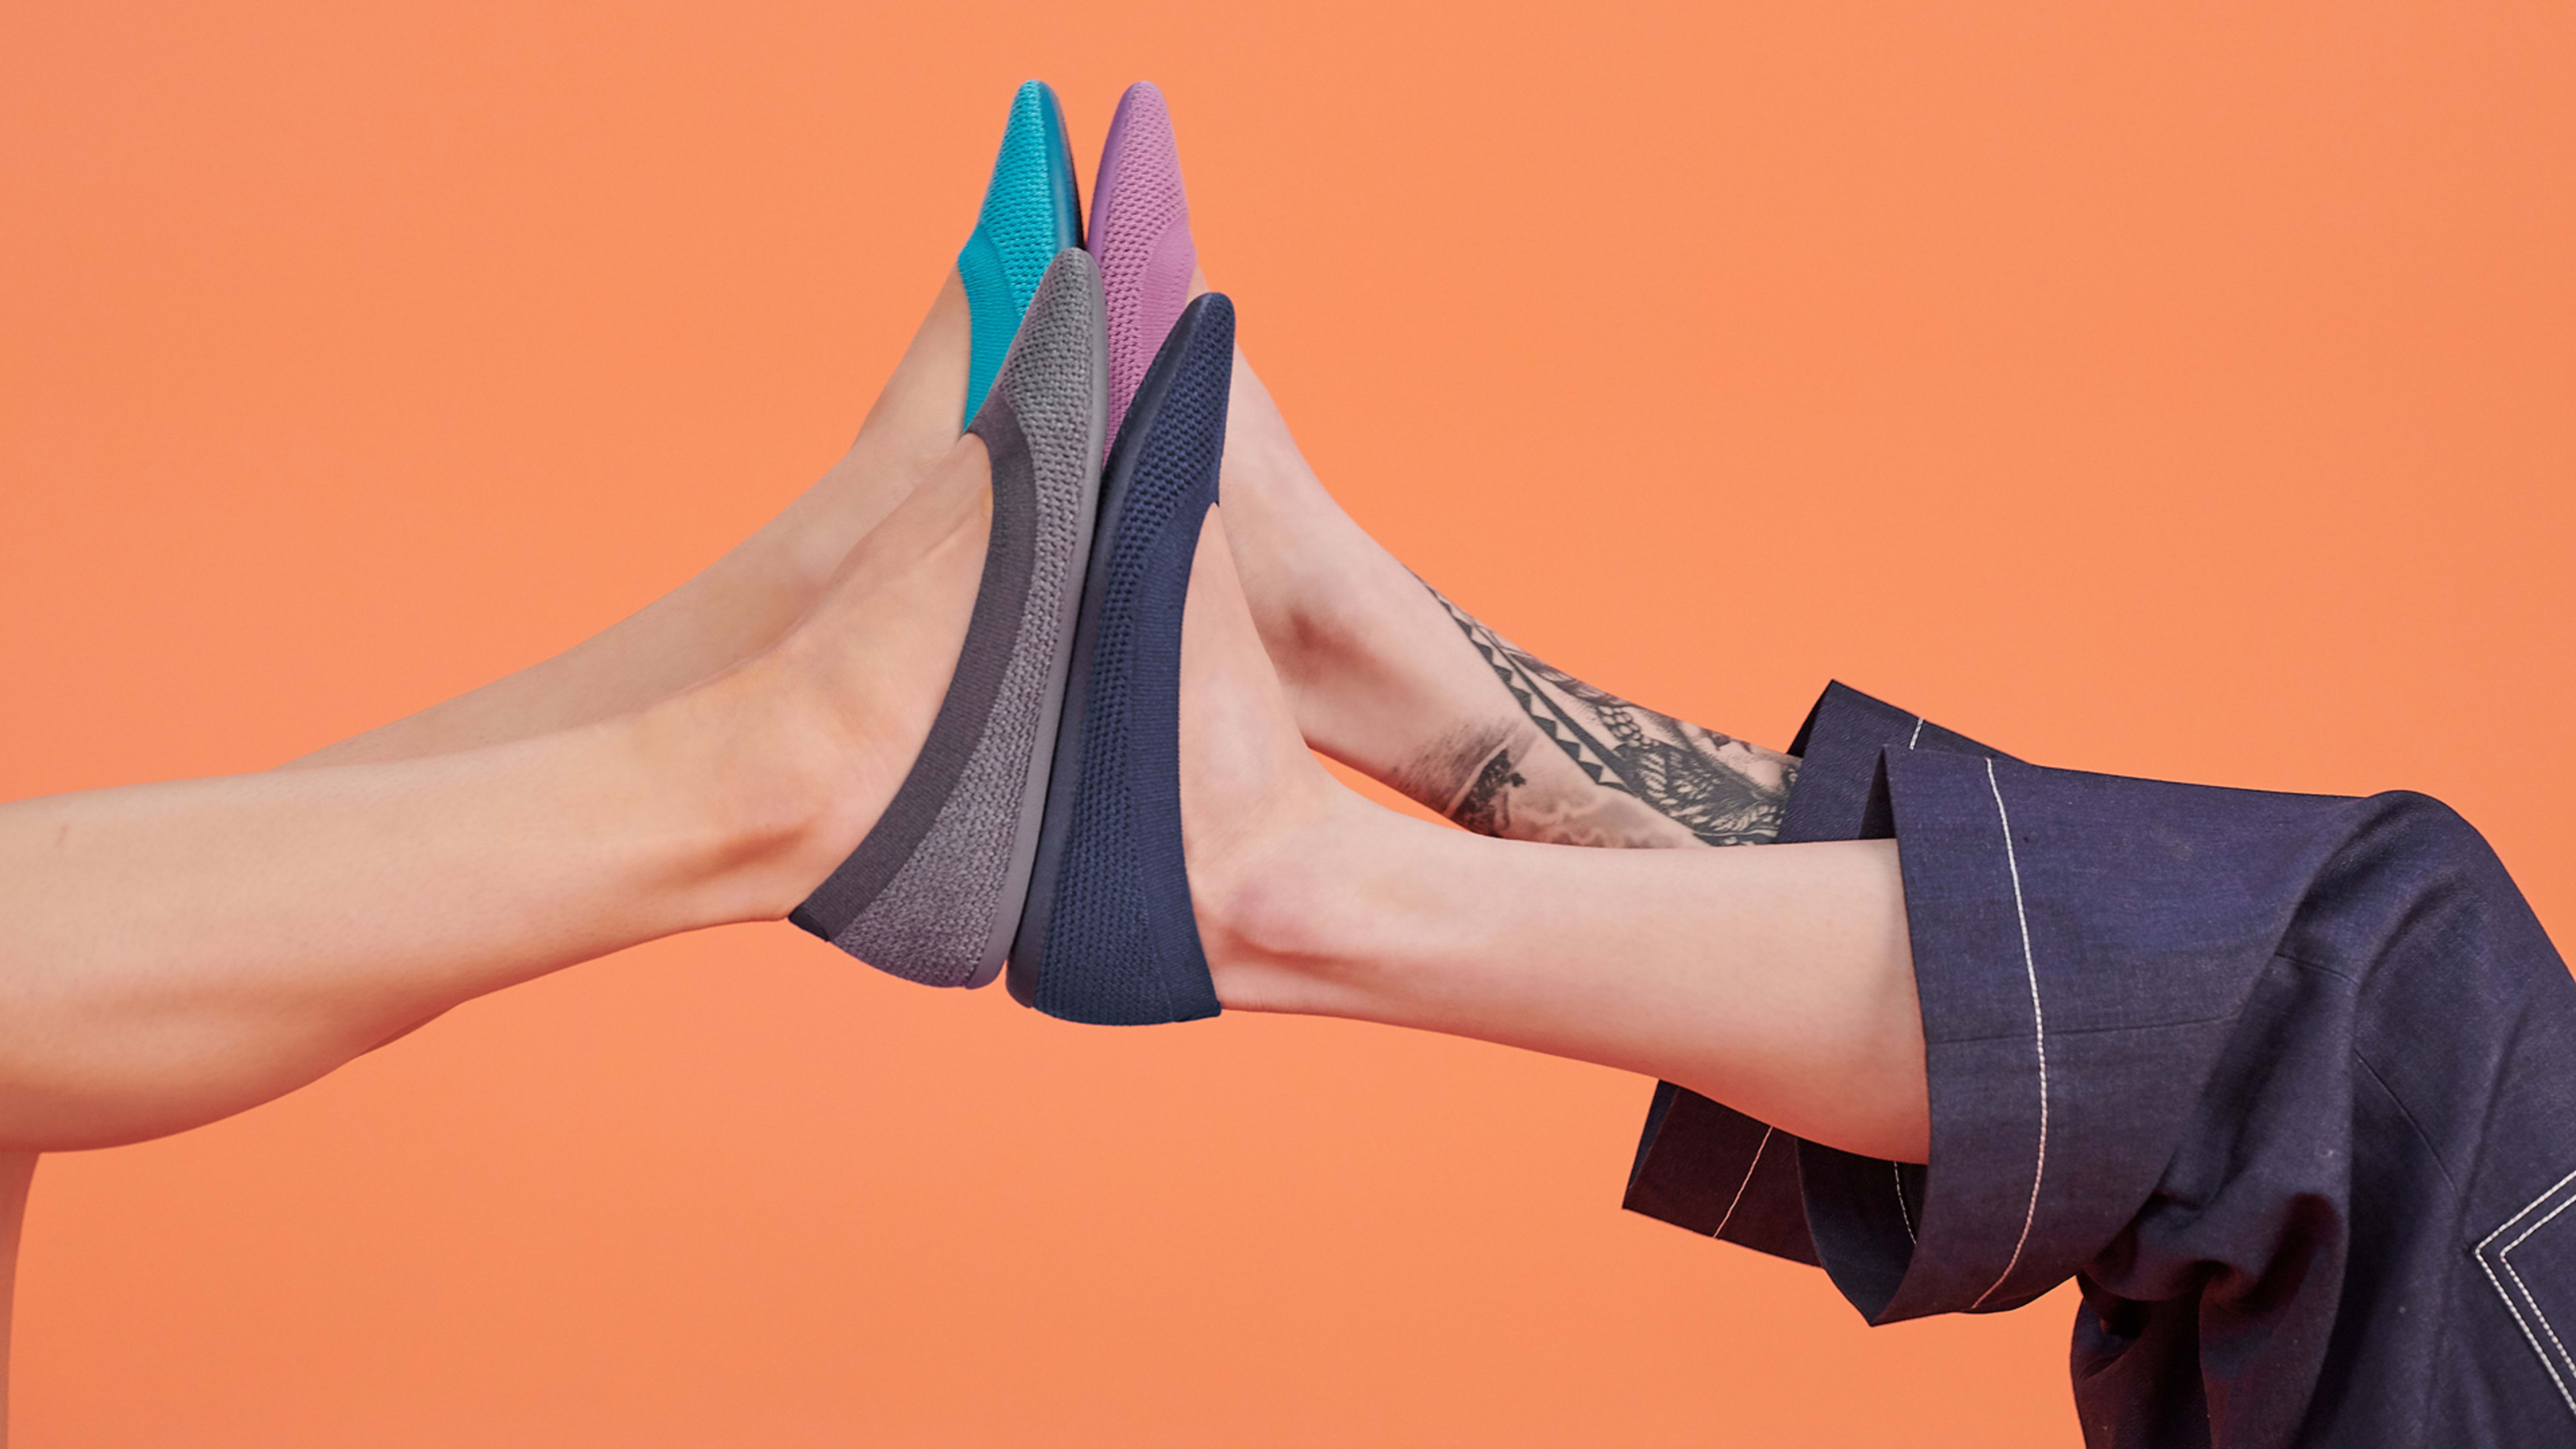 Ladies, Allbirds just created a ballet flat for you